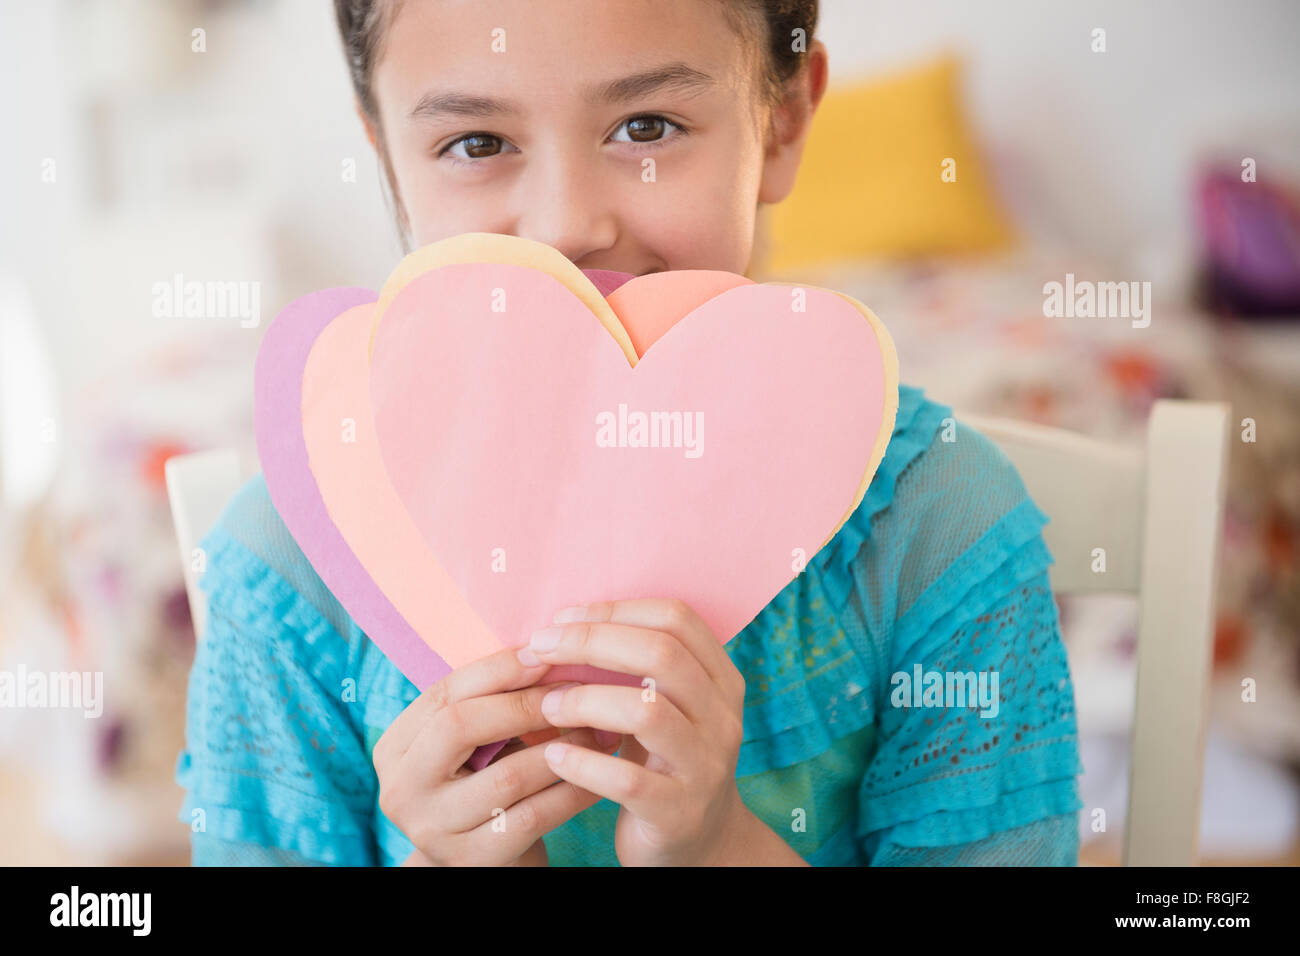 Girl holding paper hearts Stock Photo